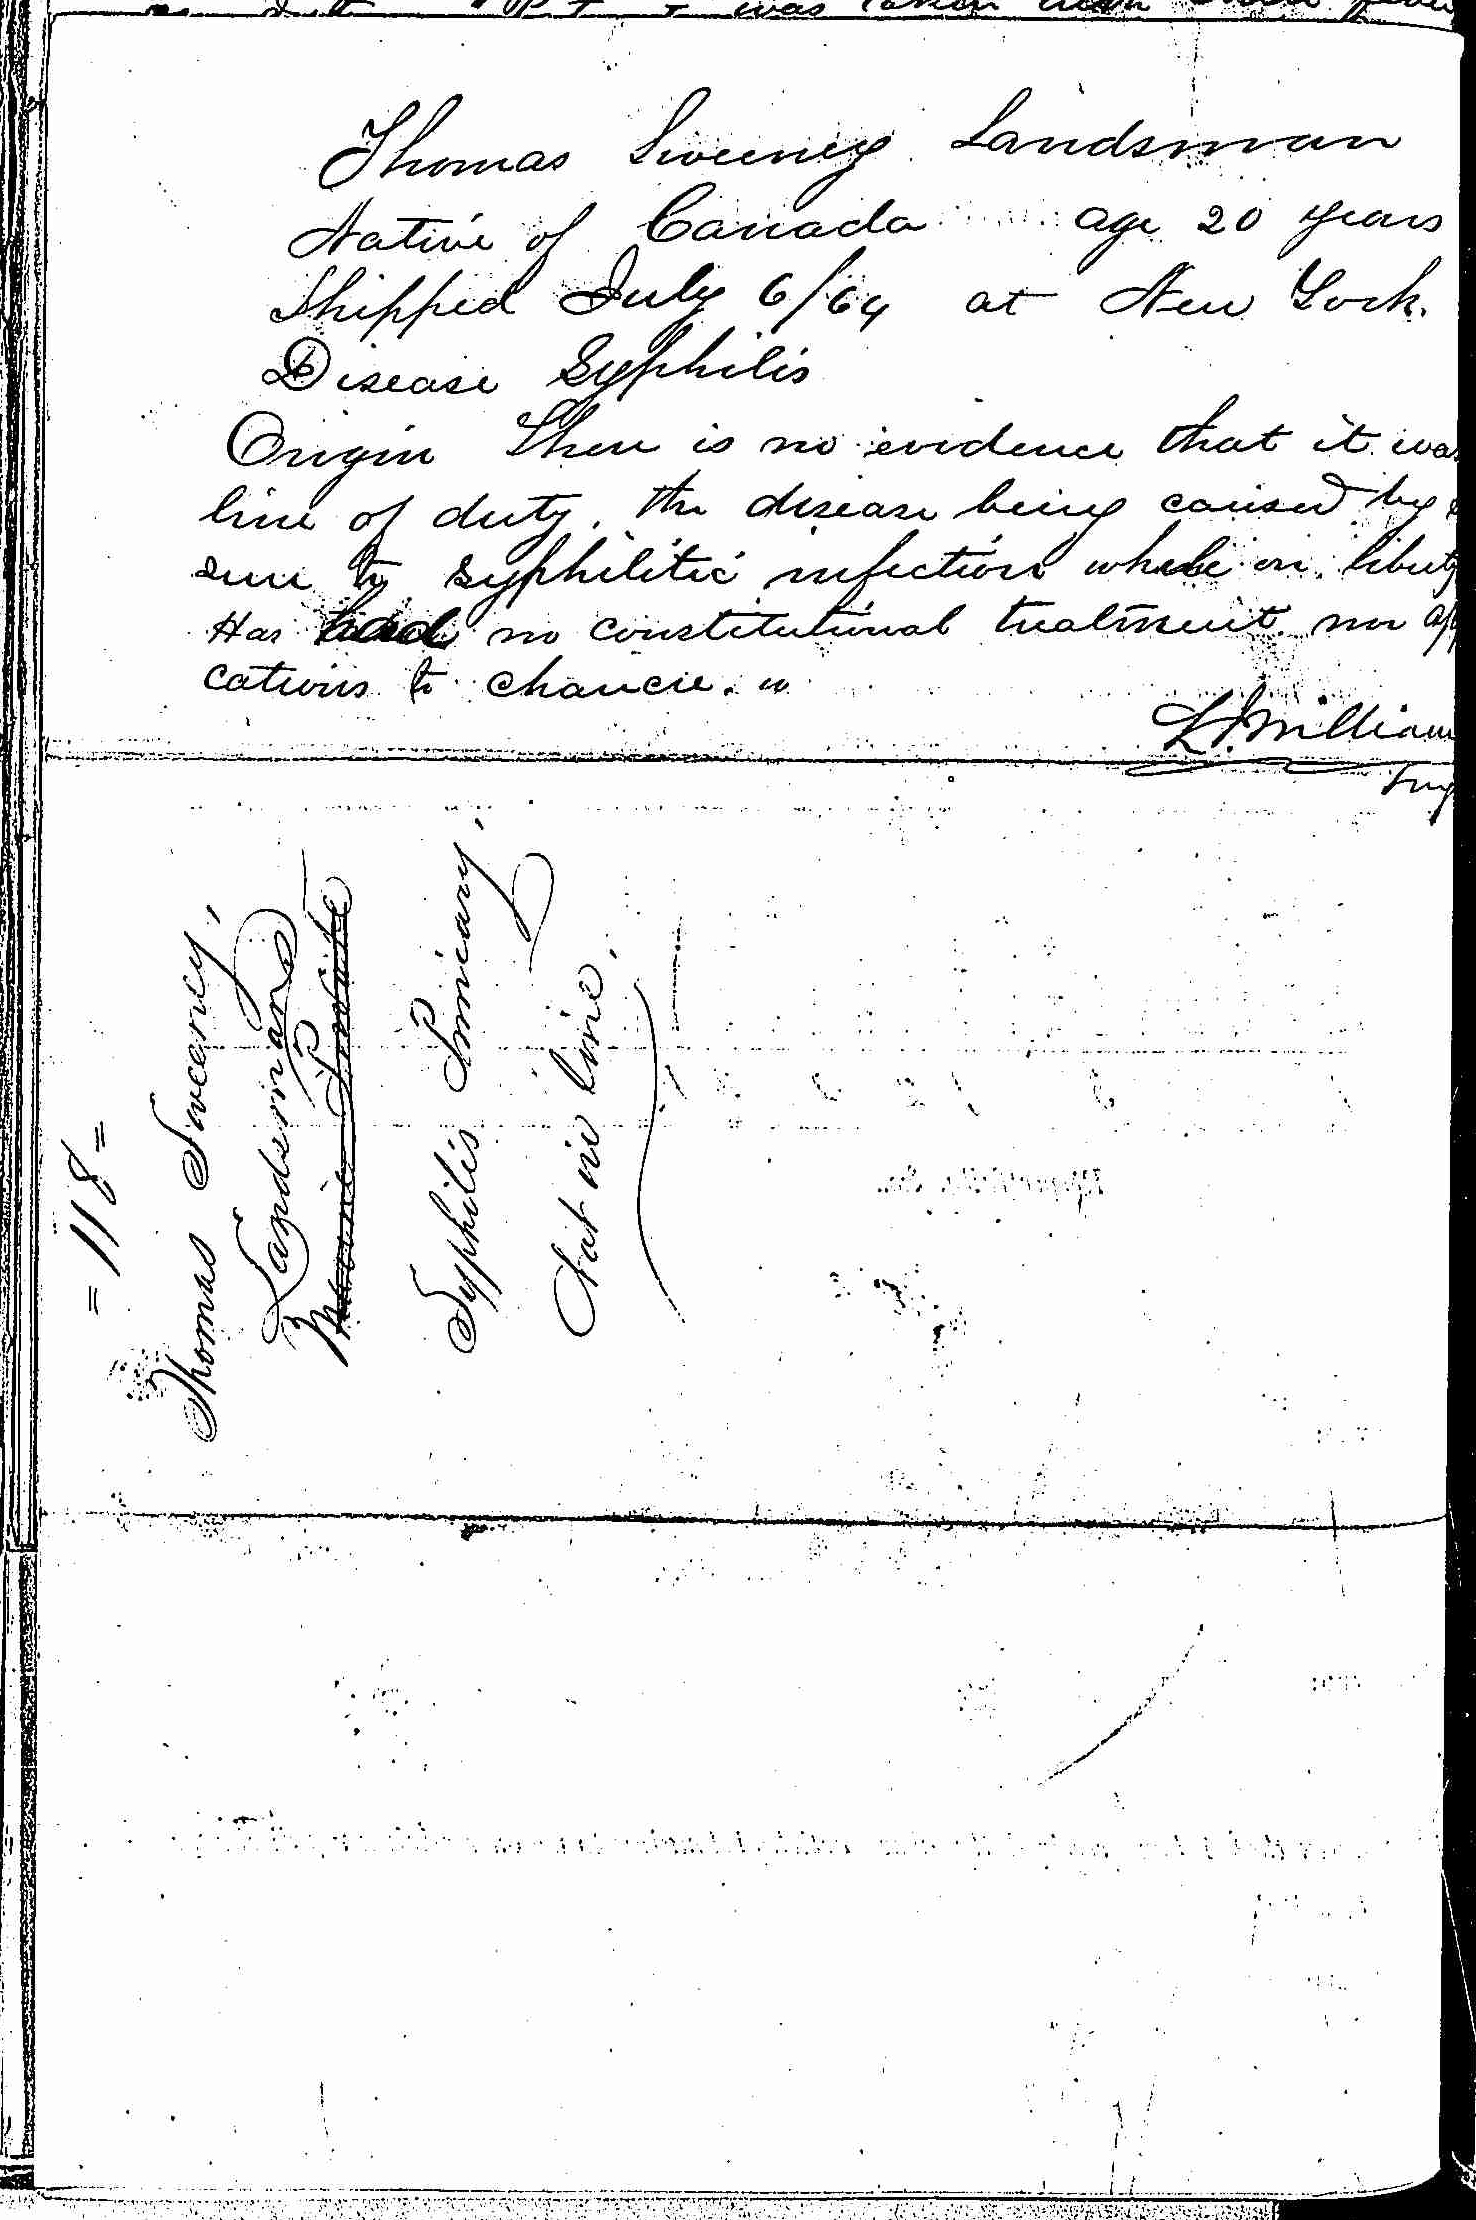 Entry for Thomas Sweeney (page 2 of 2) in the log Hospital Tickets and Case Papers - Naval Hospital - Washington, D.C. - 1866-68